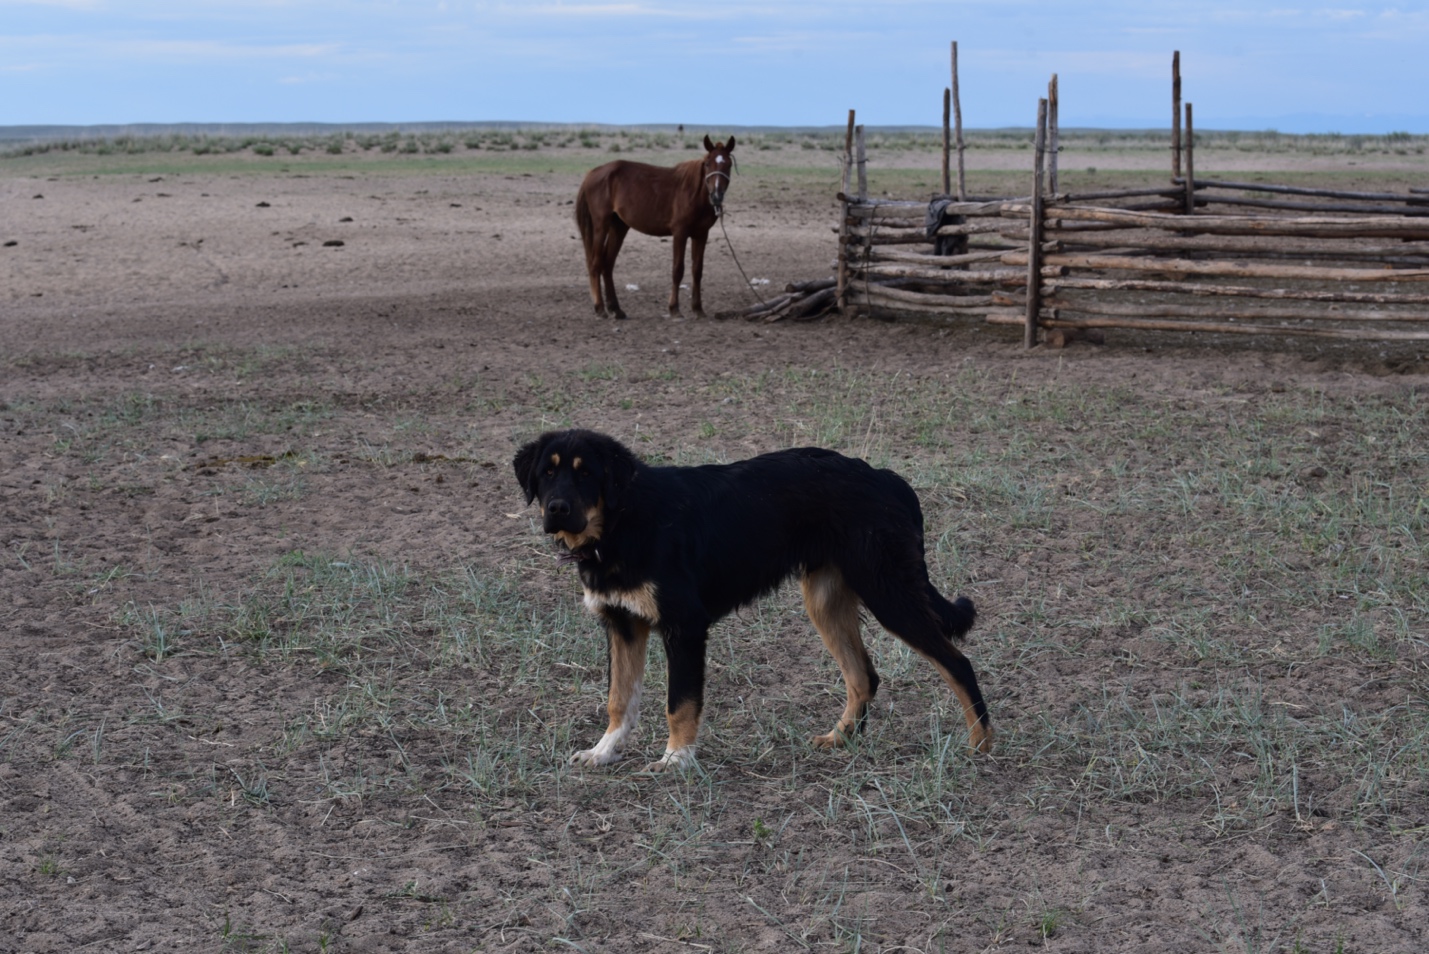 A dog and a horse in a fenced in pasture

Description automatically generated with medium confidence